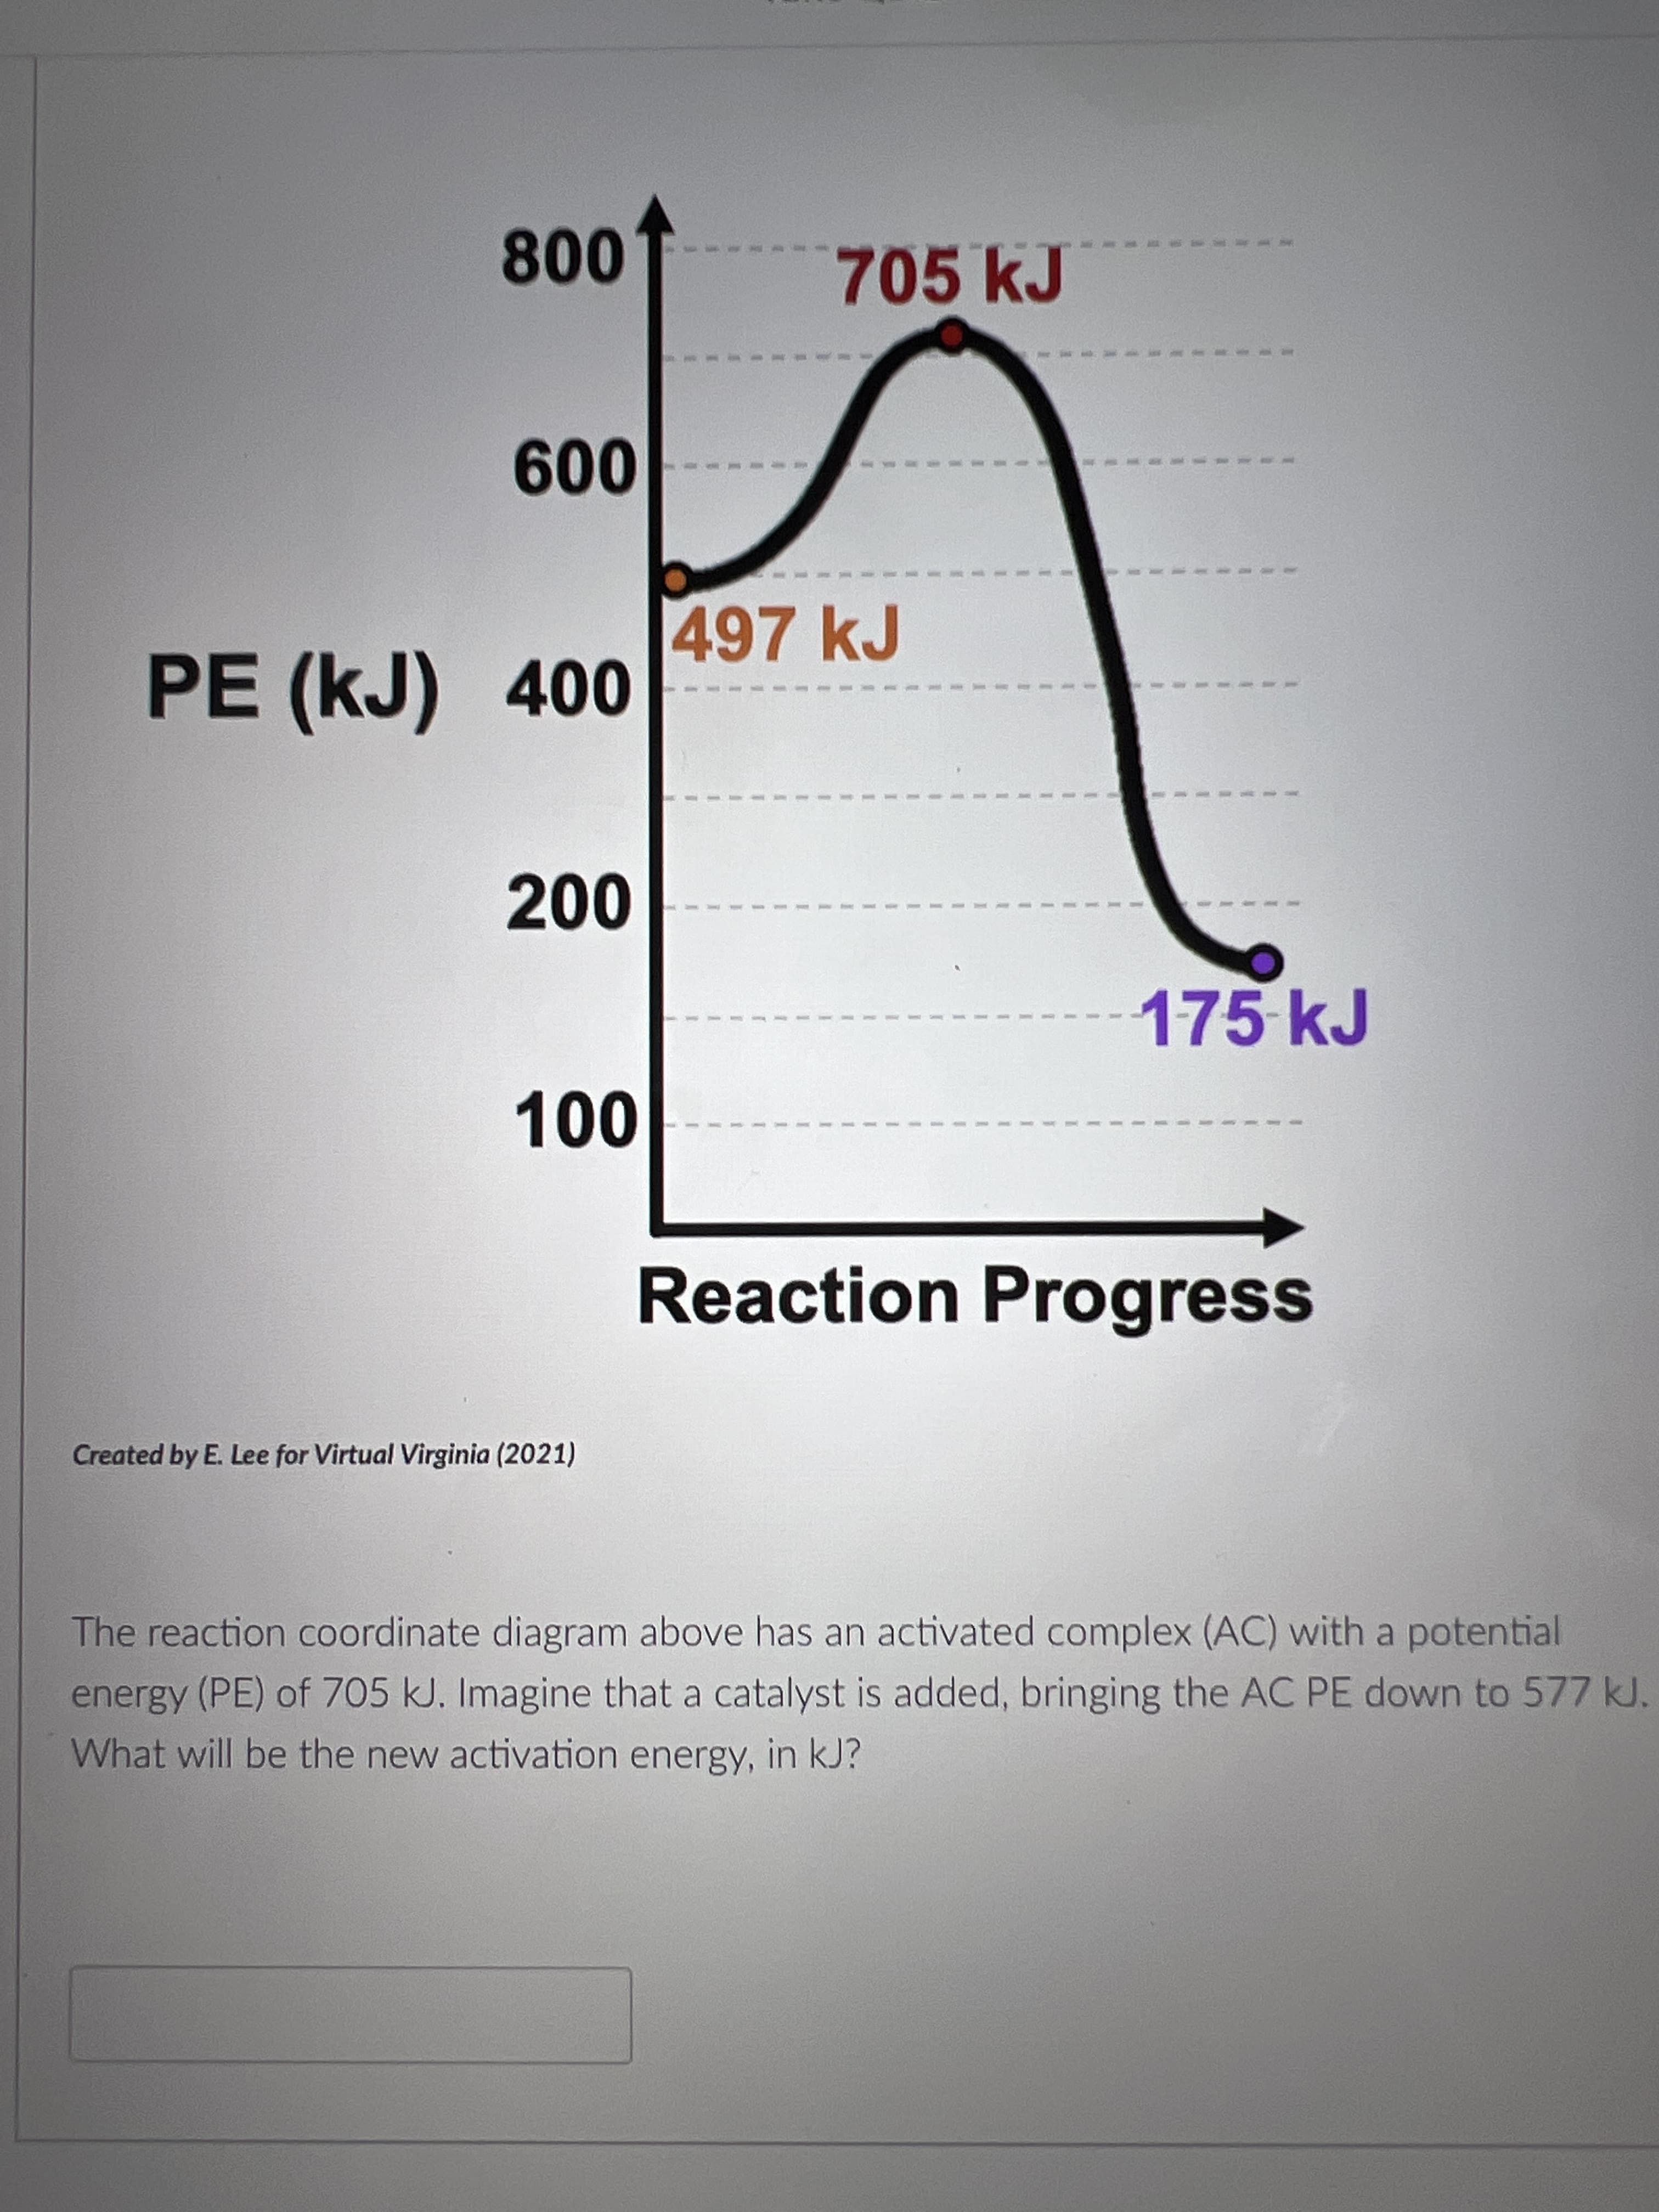 800
600
PE (KJ) 400
200
100
705 kJ
497 kJ
175 kJ
Reaction Progress
Created by E. Lee for Virtual Virginia (2021)
The reaction coordinate diagram above has an activated complex (AC) with a potential
energy (PE) of 705 kJ. Imagine that a catalyst is added, bringing the AC PE down to 577 kJ.
What will be the new activation energy, in kJ?